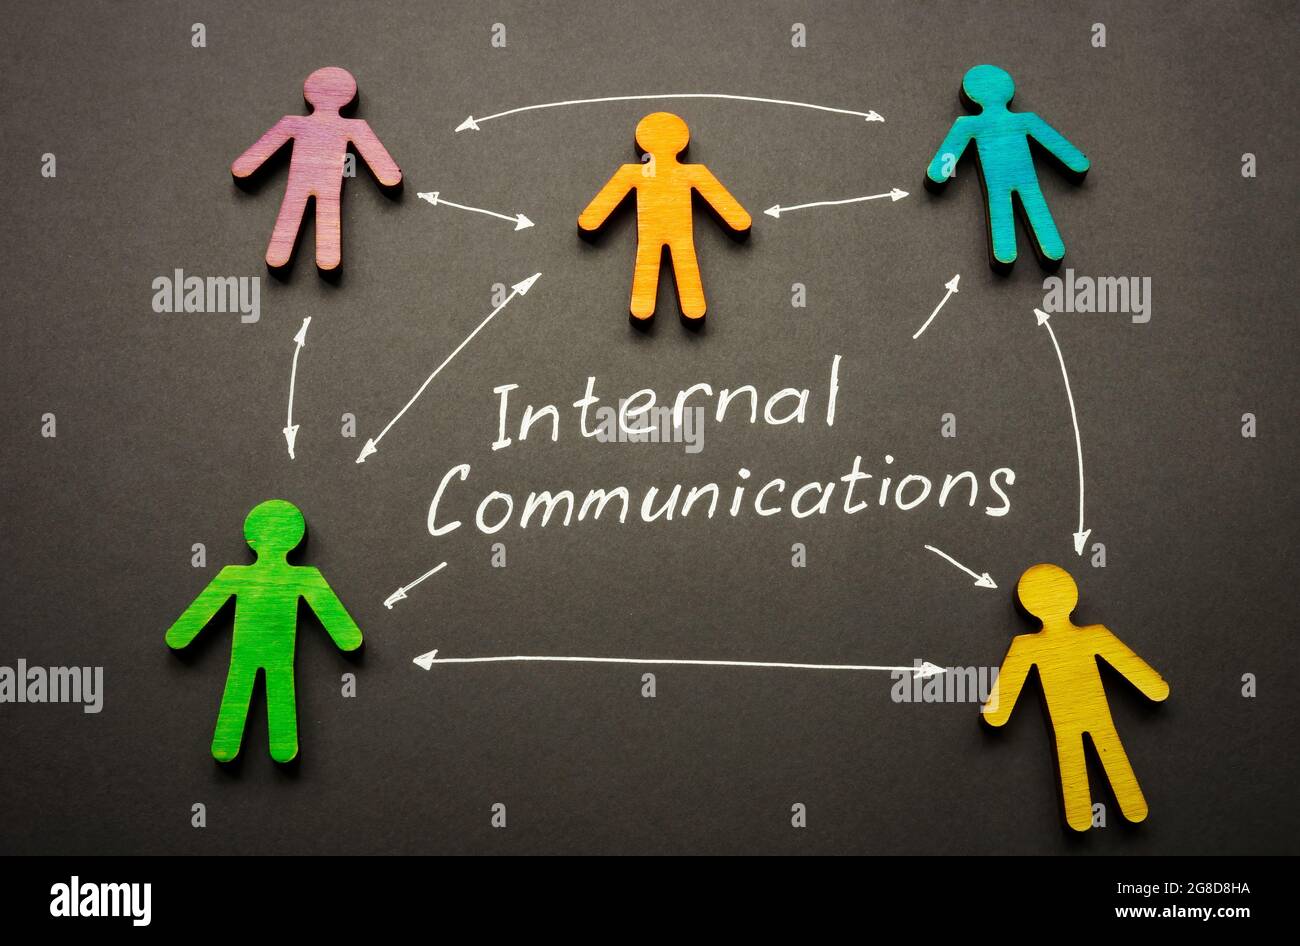 Internal communications words and arrows connected figures. Stock Photo